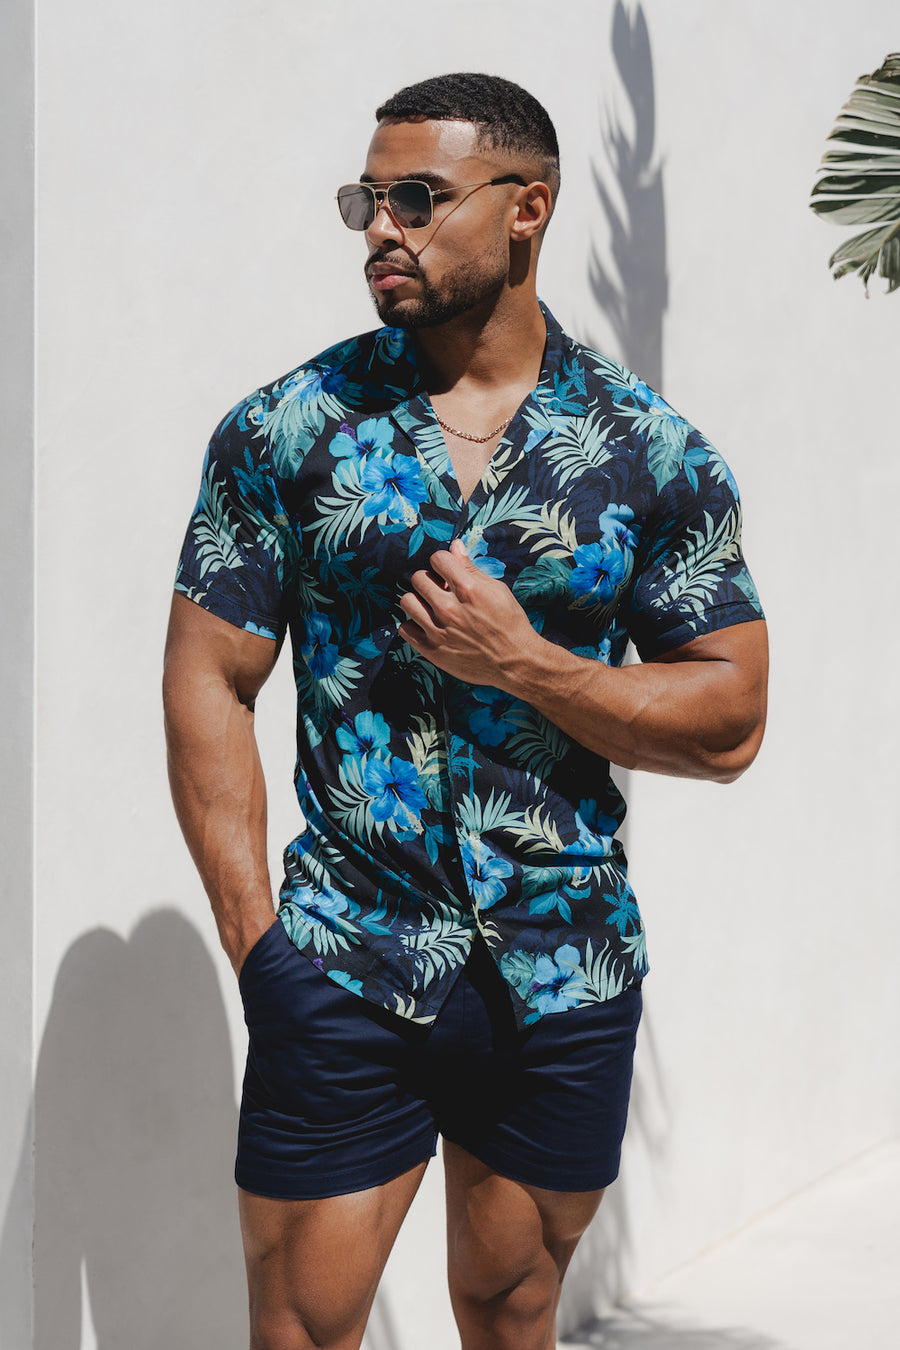 Printed Shirt in Navy Tropical Palms - TAILORED ATHLETE - USA